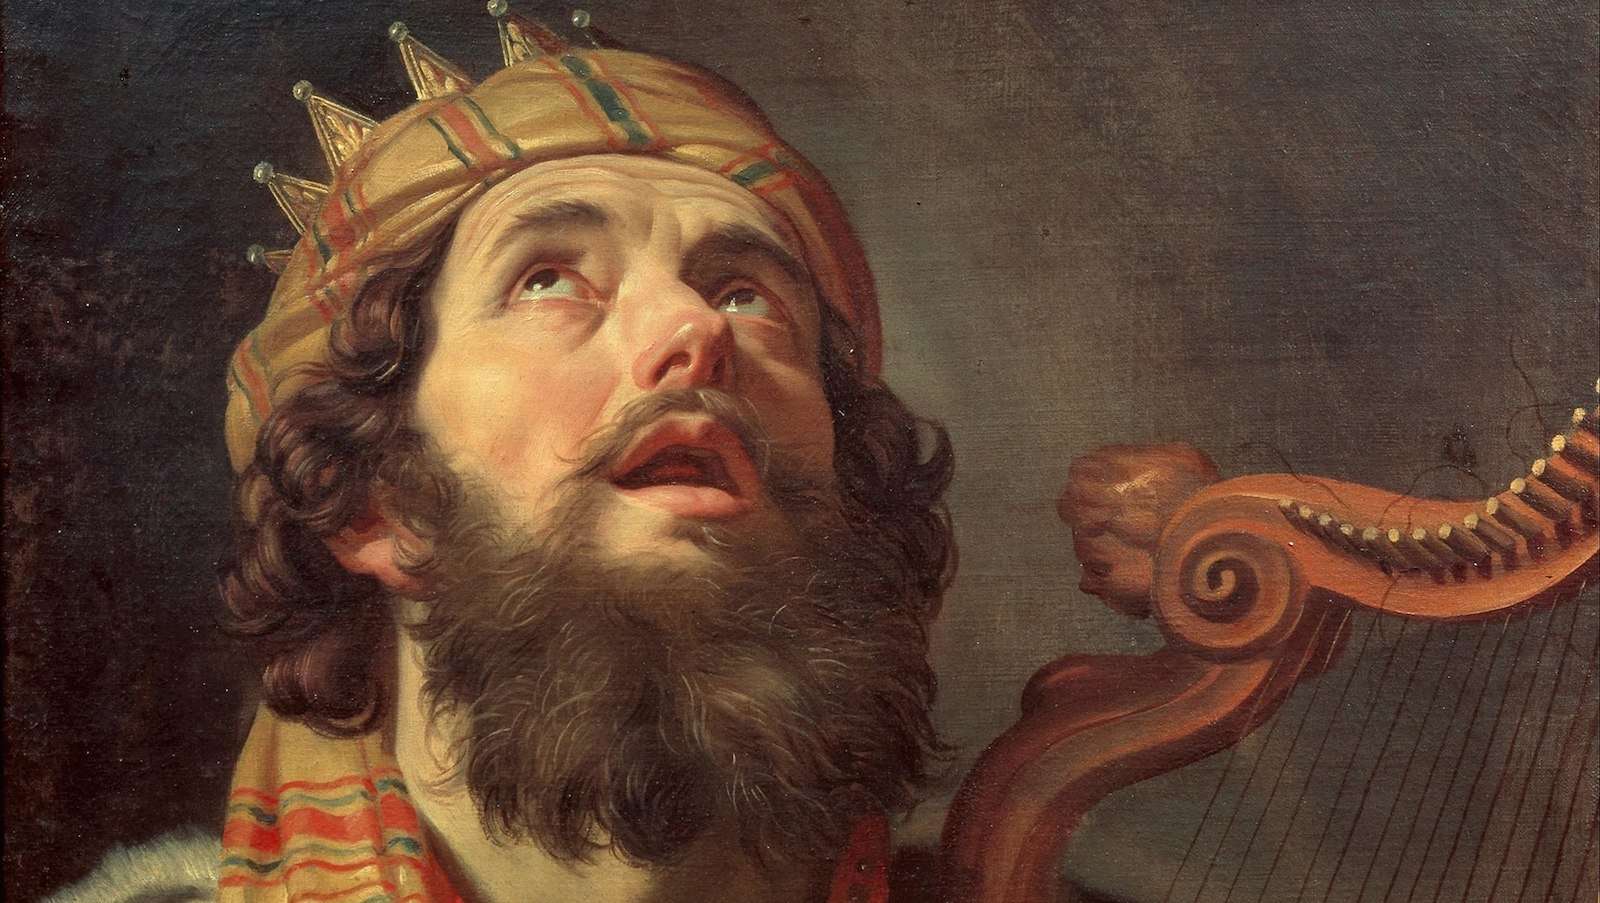 The Many Faces of King David